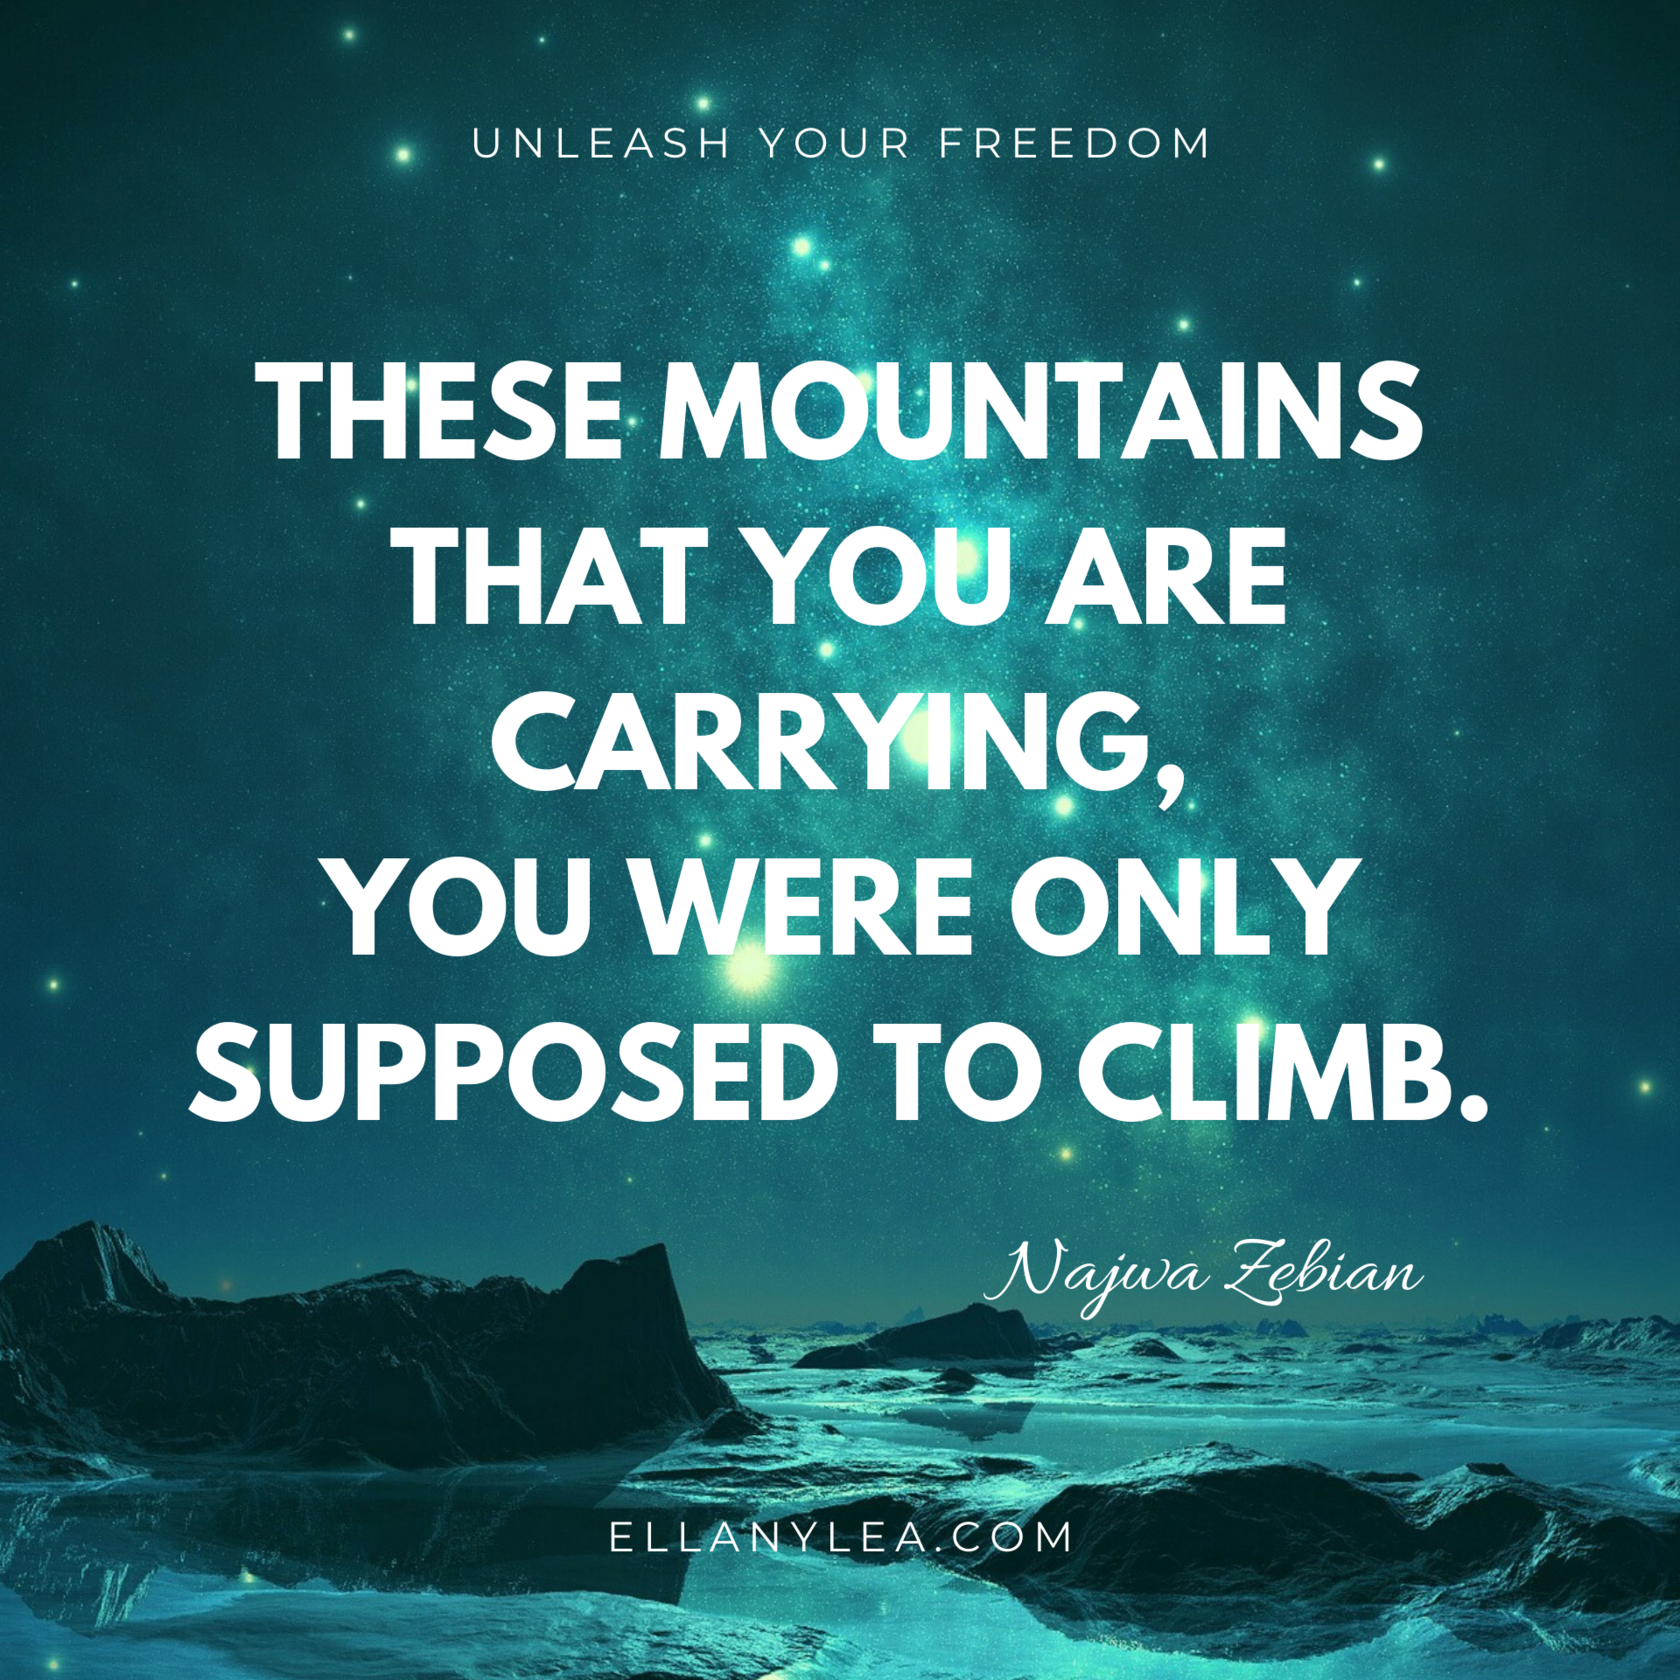 quote - moutains carrying